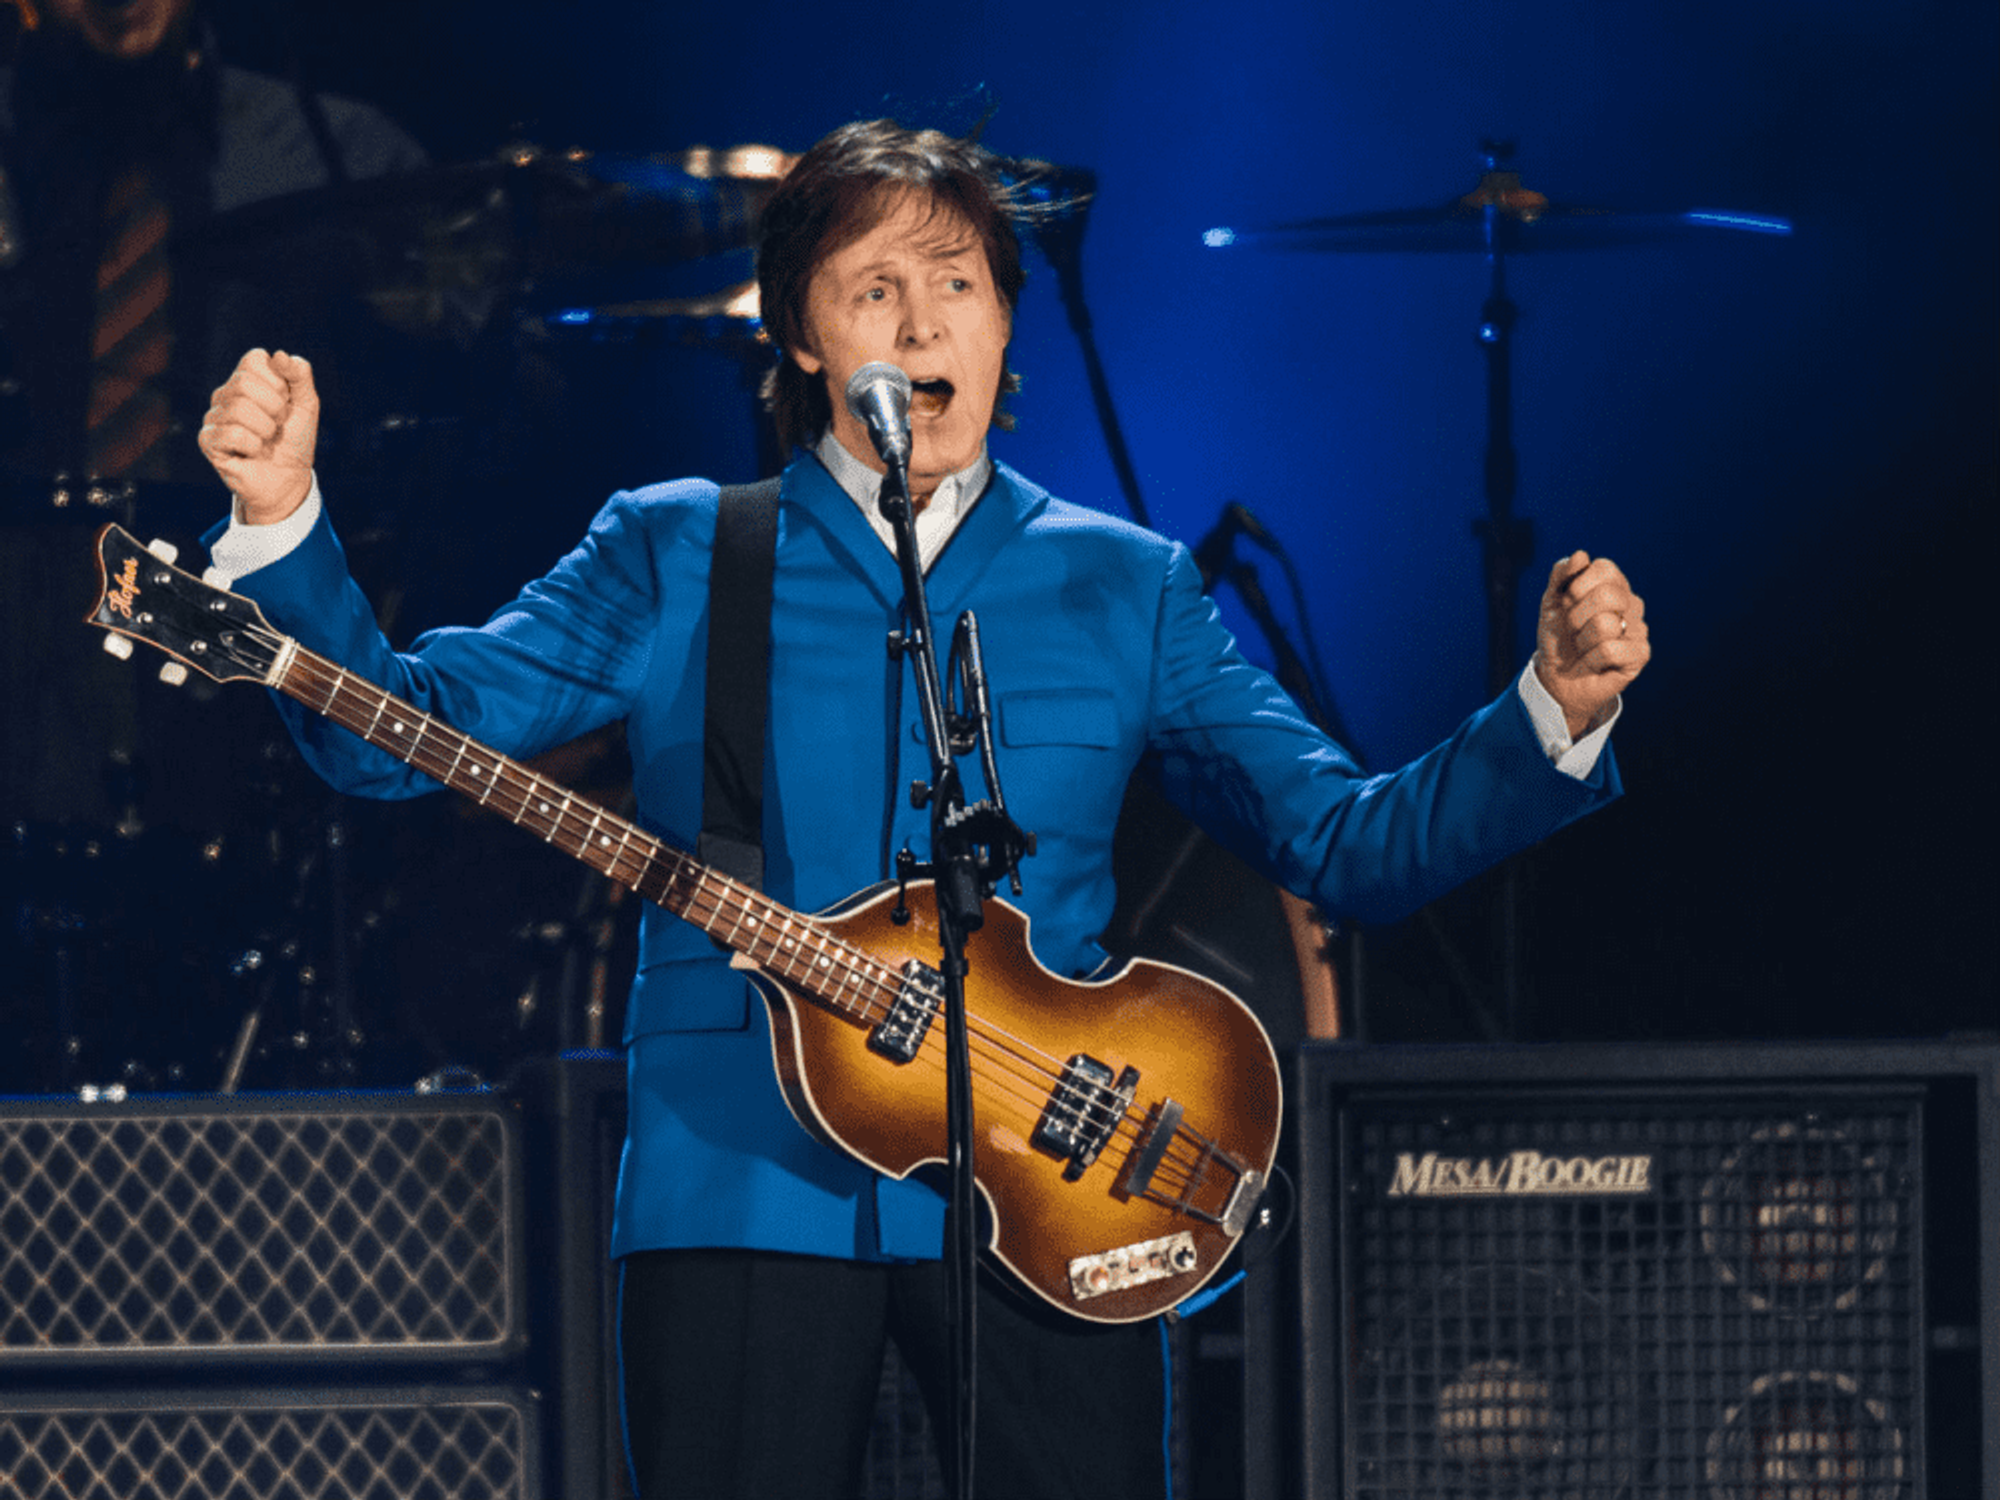 Paul McCartney makes a rare appearance in Dallas when he plays at American Airlines Center on June 16.